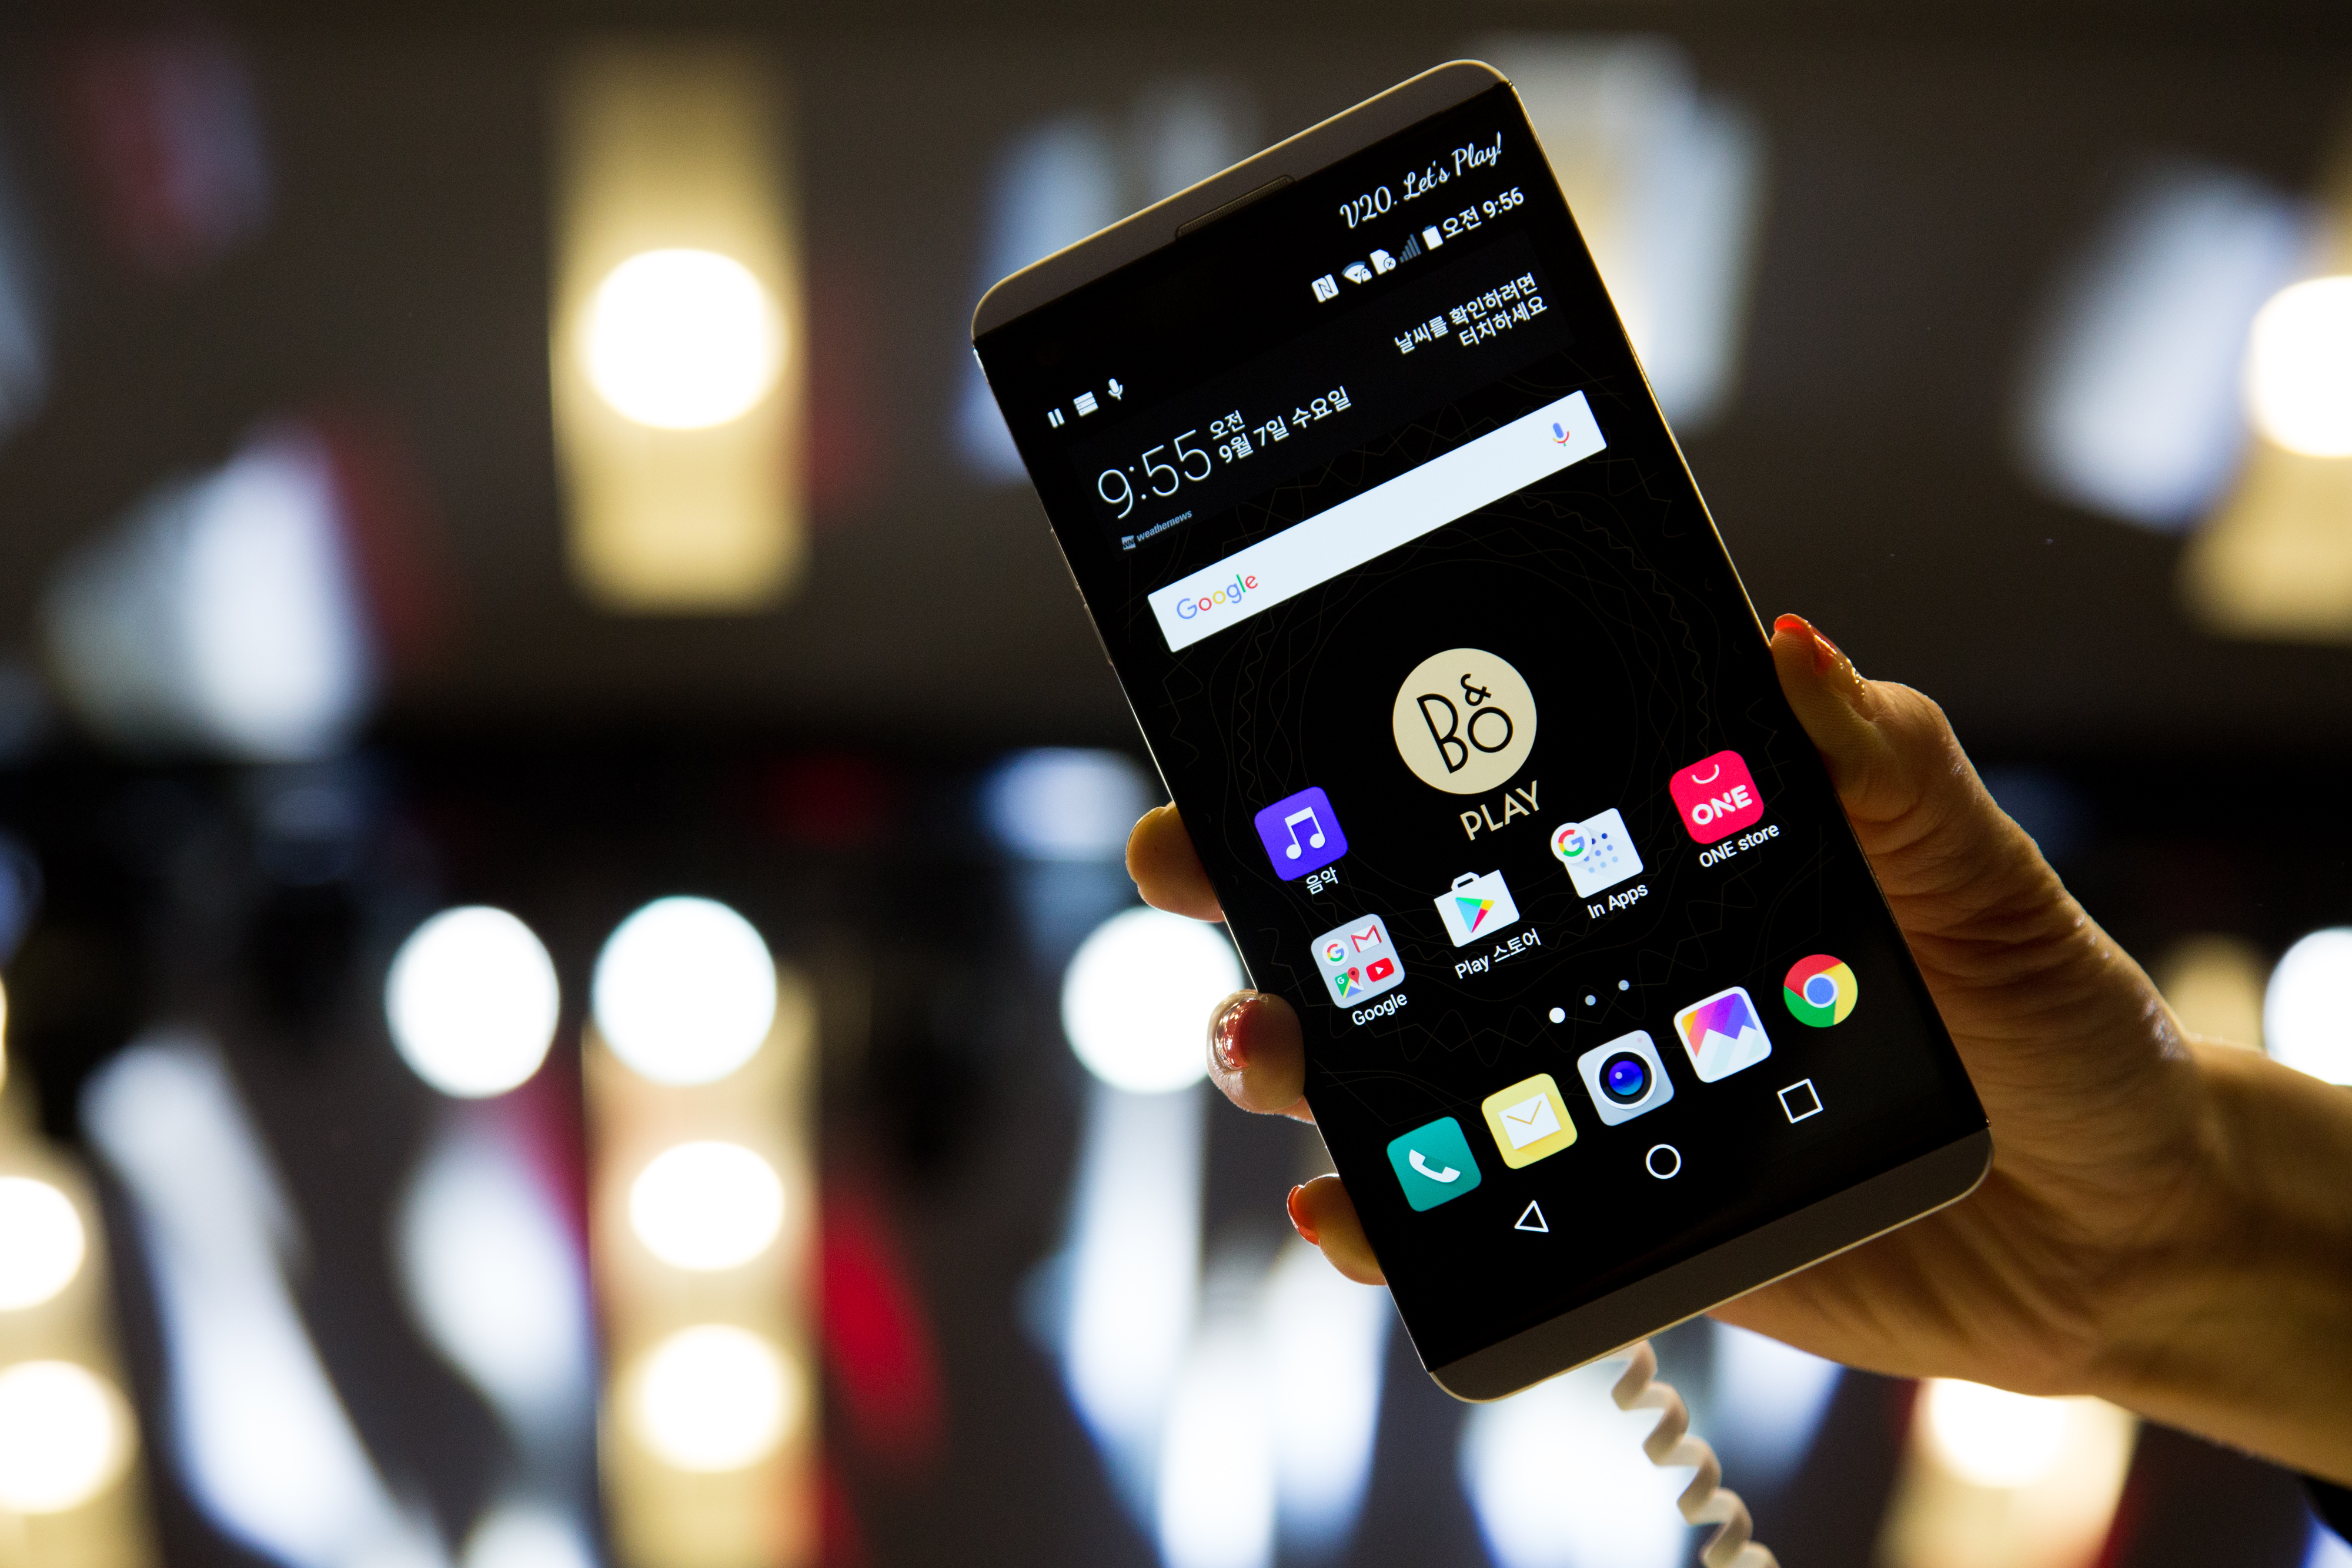 An LG Electronics Inc. V20 smartphone is displayed during a launch event in Seoul, South Korea, on Sept. 7, 2016. (SeongJoon Cho—Bloomberg /Getty Images)